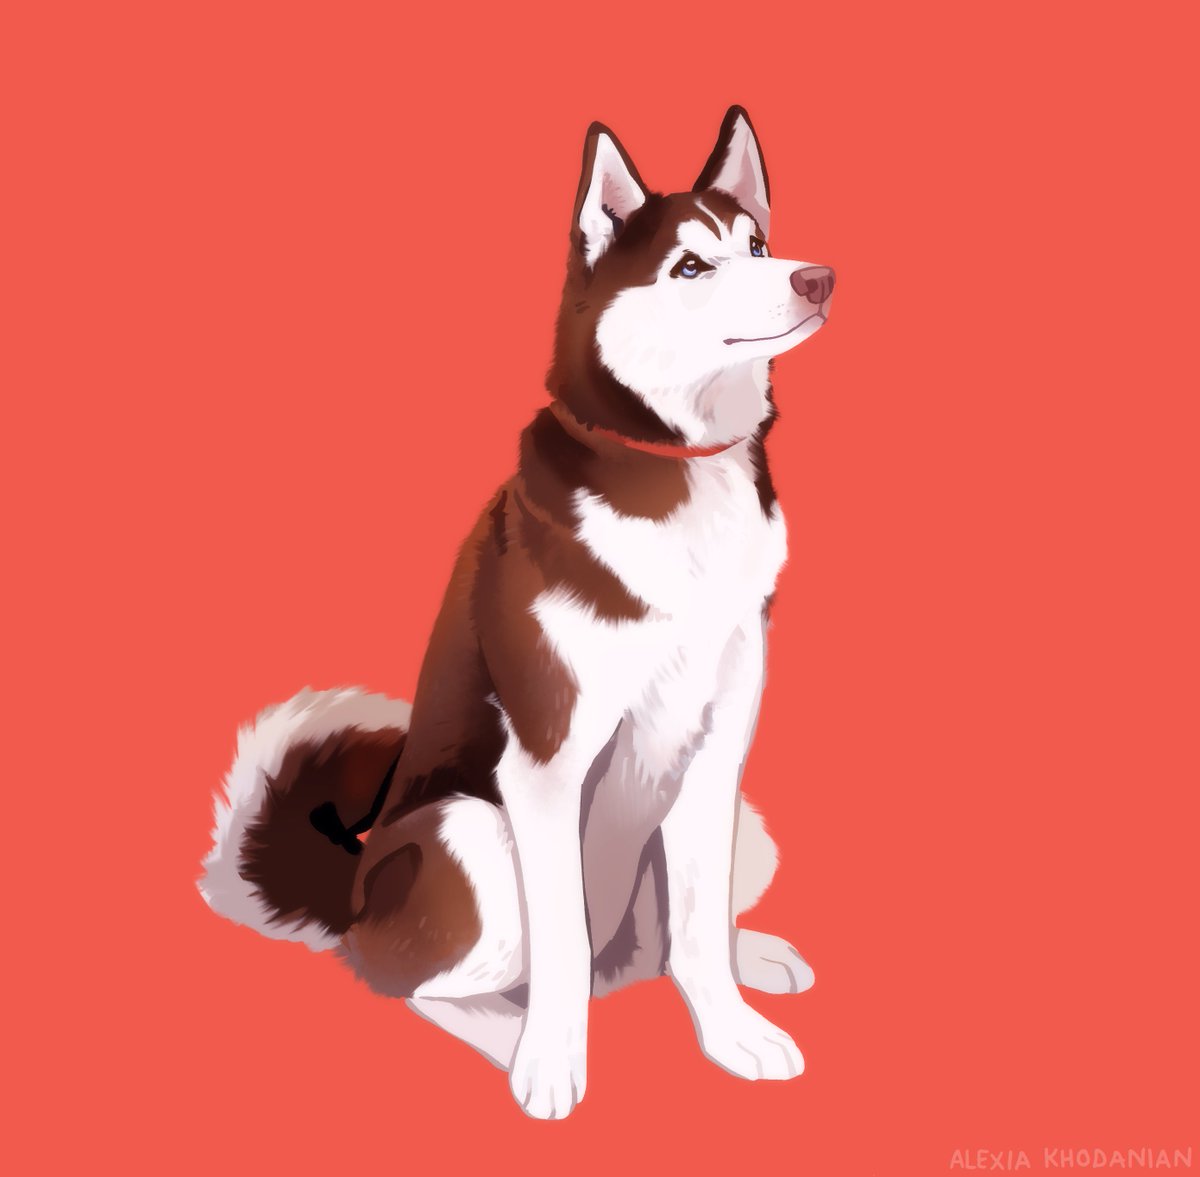  #doggust day 22: The Husky! What a popular lad! That's it for the backlog, now its up to present day alexia to finish doggust 2020 off strong!